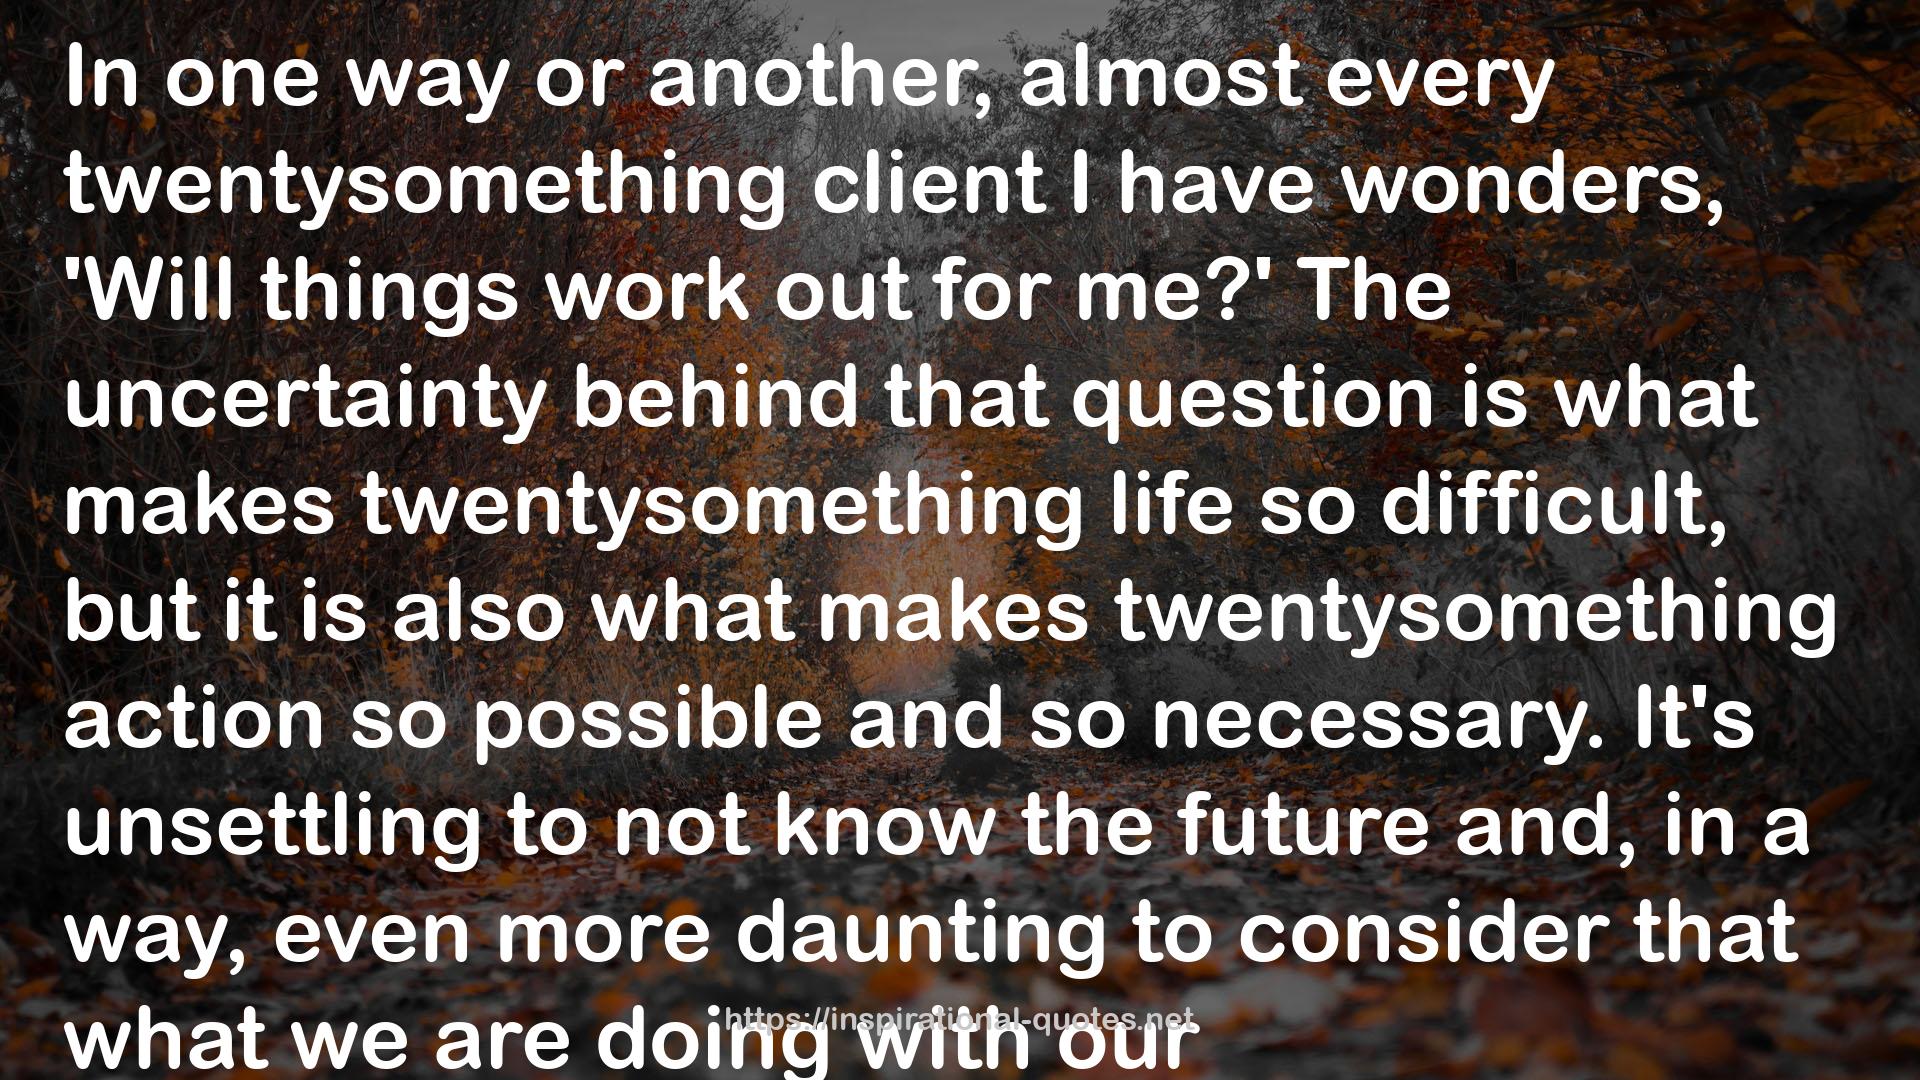 almost every twentysomething client  QUOTES